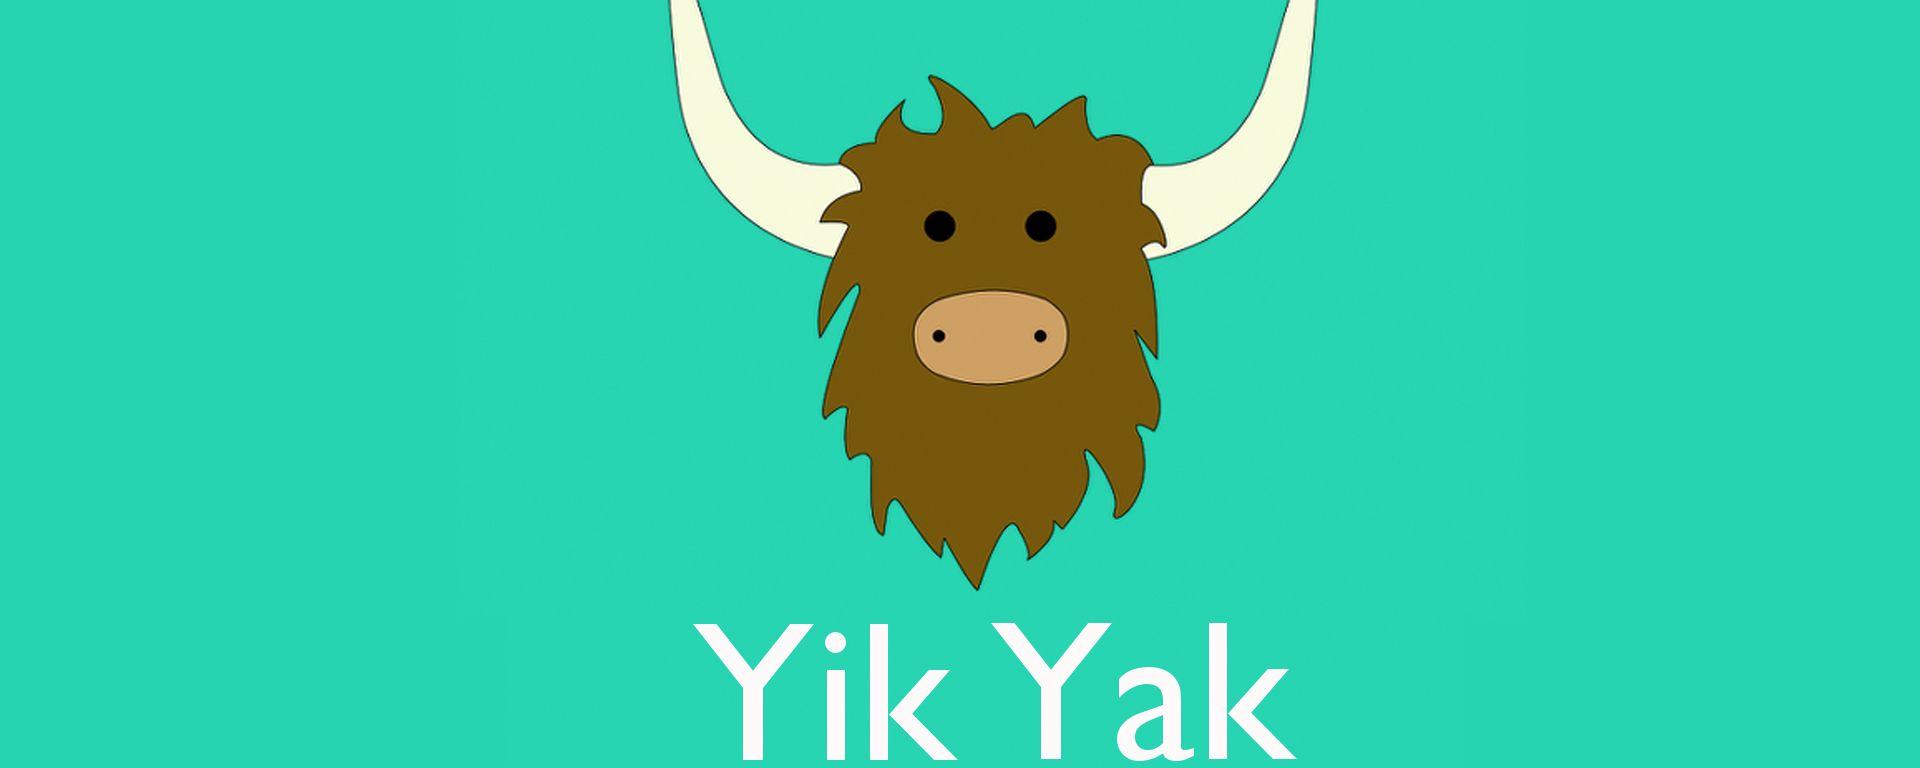 Yik Yak Black and White Logo - A Little Yik, A Little Yak, Some Say a lot of Ick